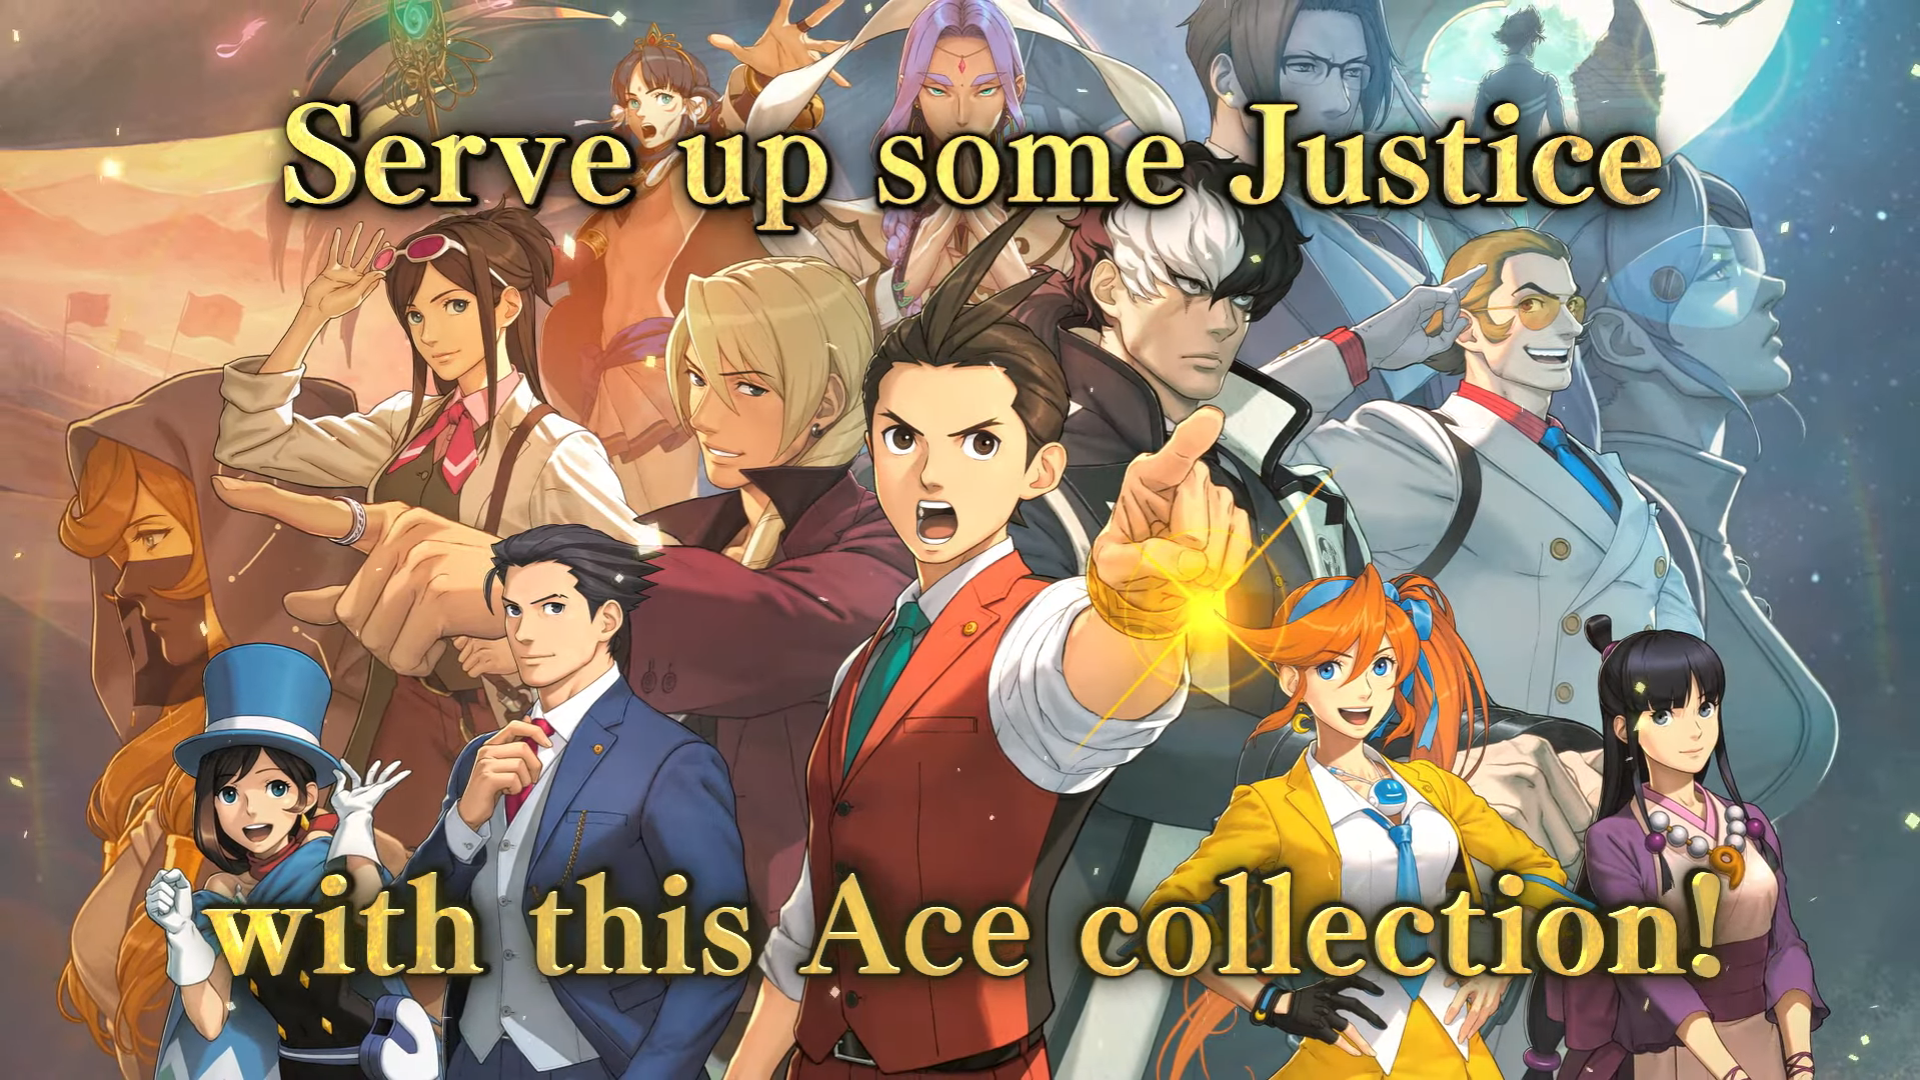 Apollo Justice: Ace Attorney Trilogy release date, new trailer